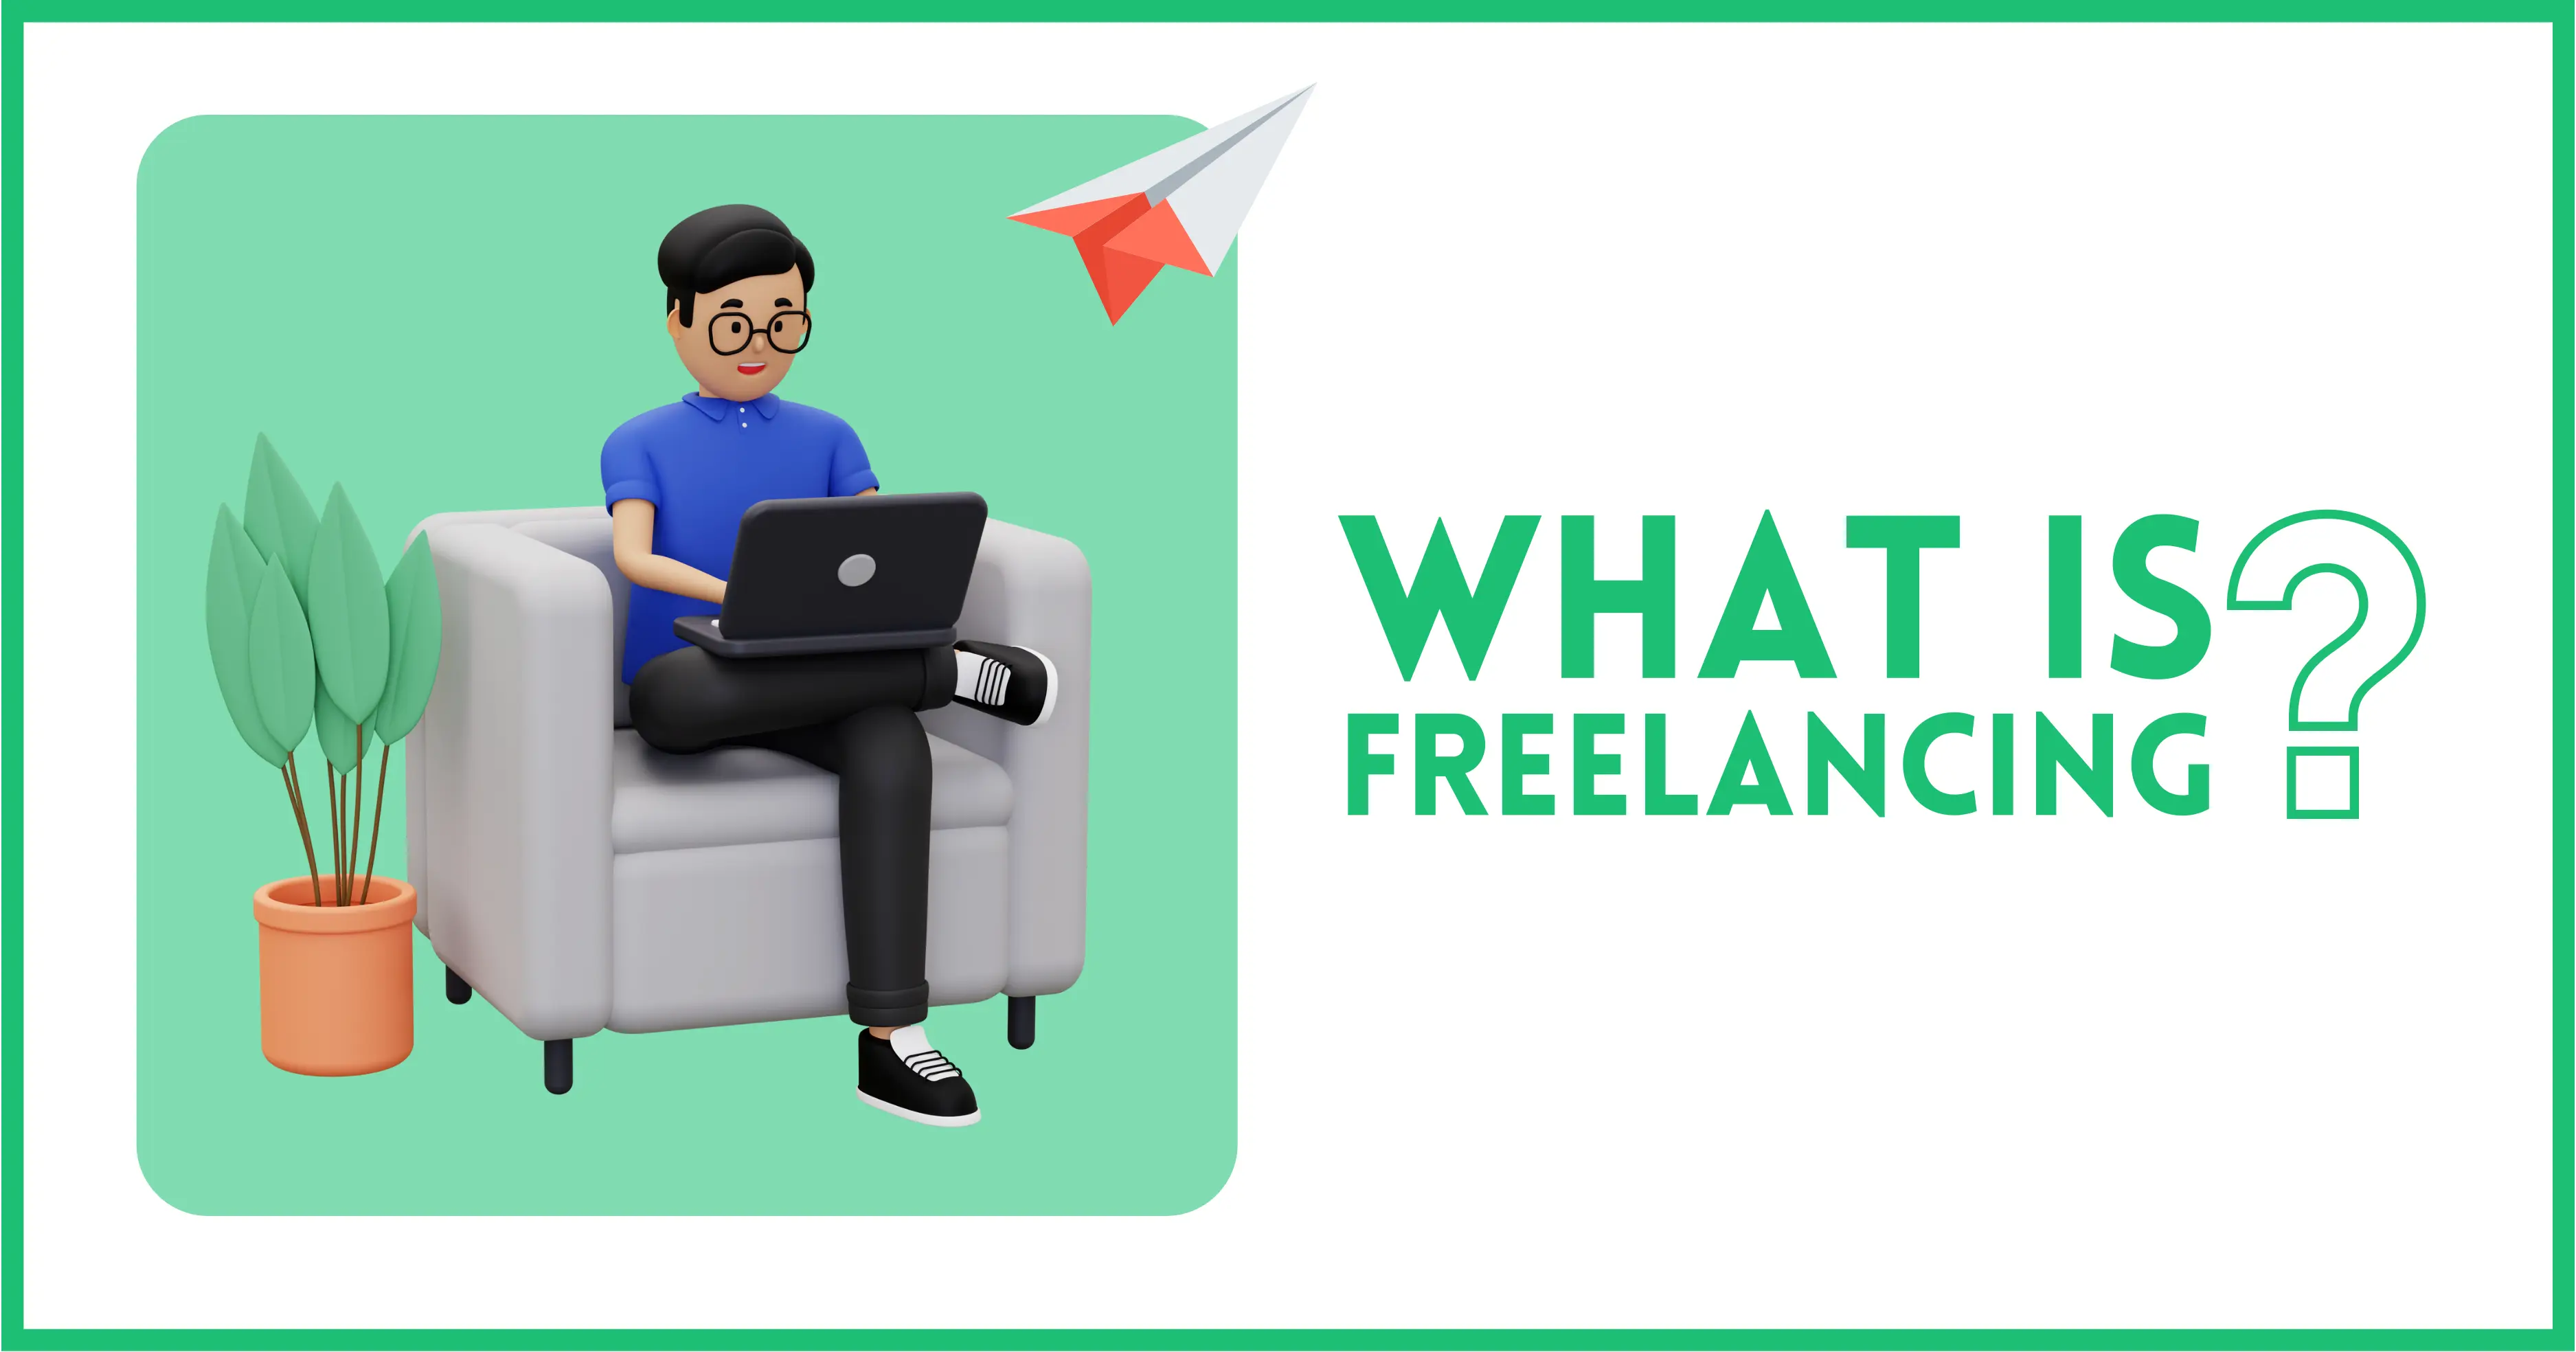 What is freelancing? Know these guidelines to build a freelancing career!